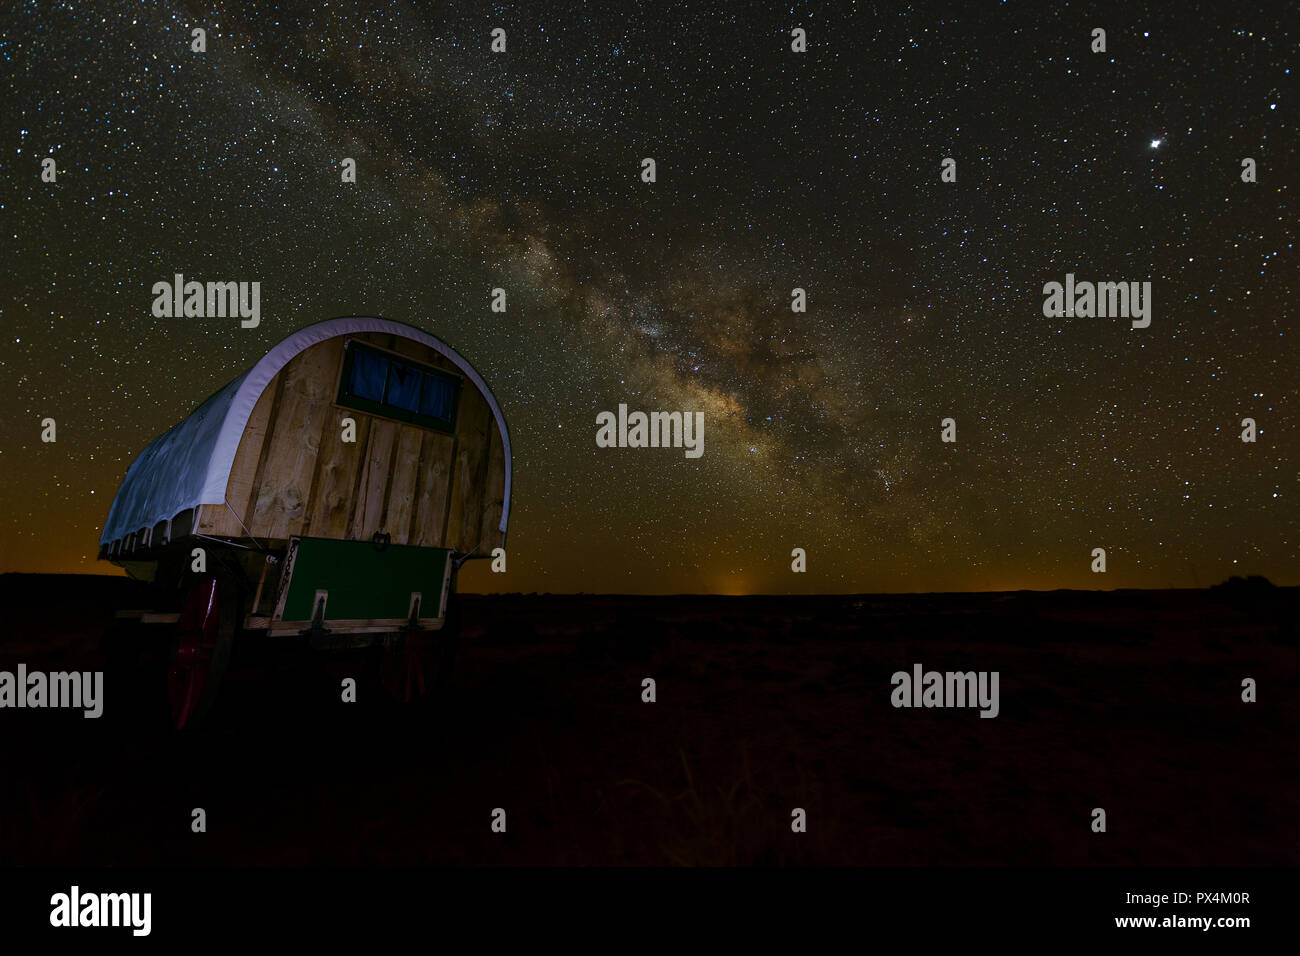 Arizona, USA. A settler-style wagon with red wheels sits underneath a brilliant display of the Milky Way. Stock Photo